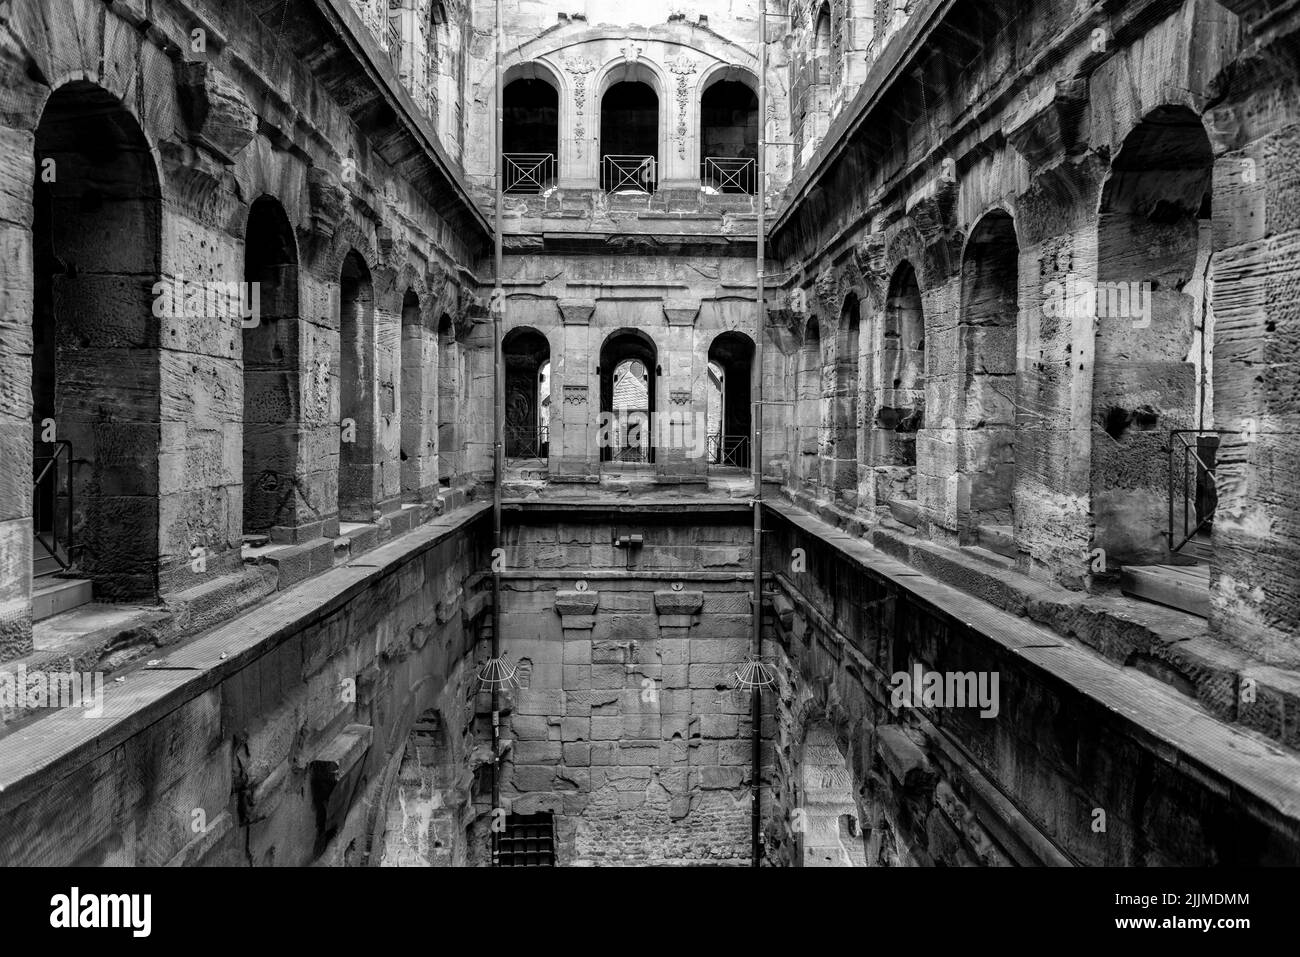 A grayscale image of the ancient Porta Nigra Roman city gate walls from the inside, in Trier, Germany Stock Photo